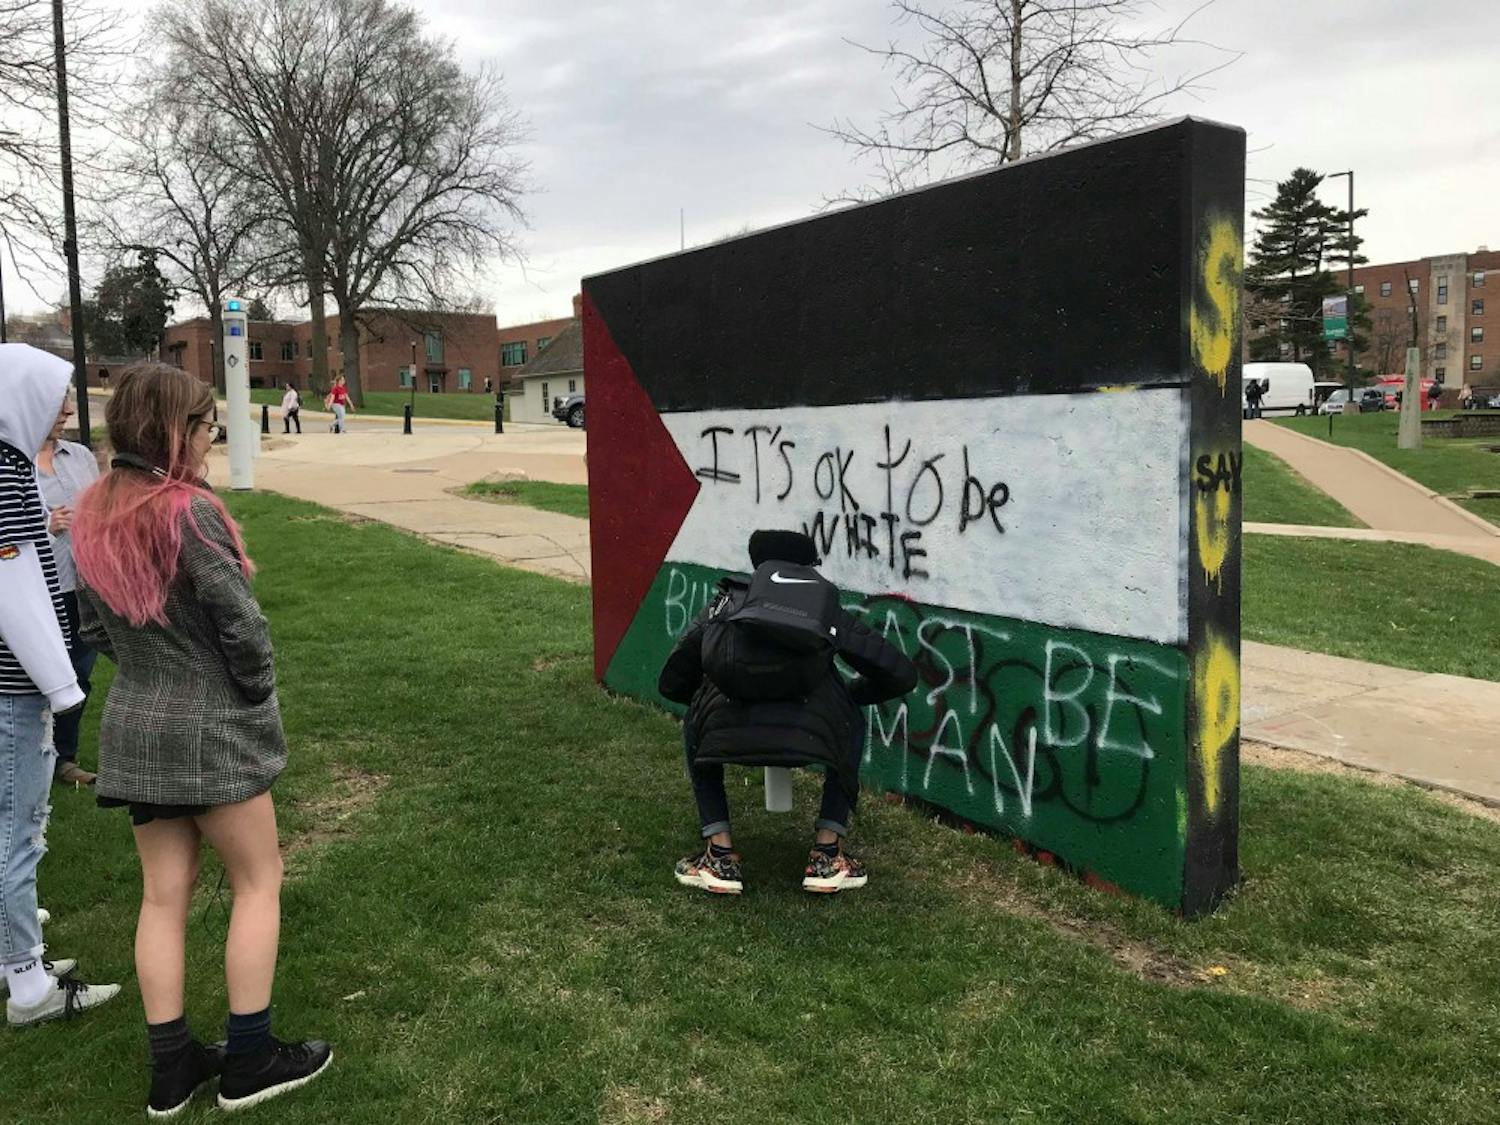 Students Paint Responses to the Controversial Phrase Written on the Freedom Walls